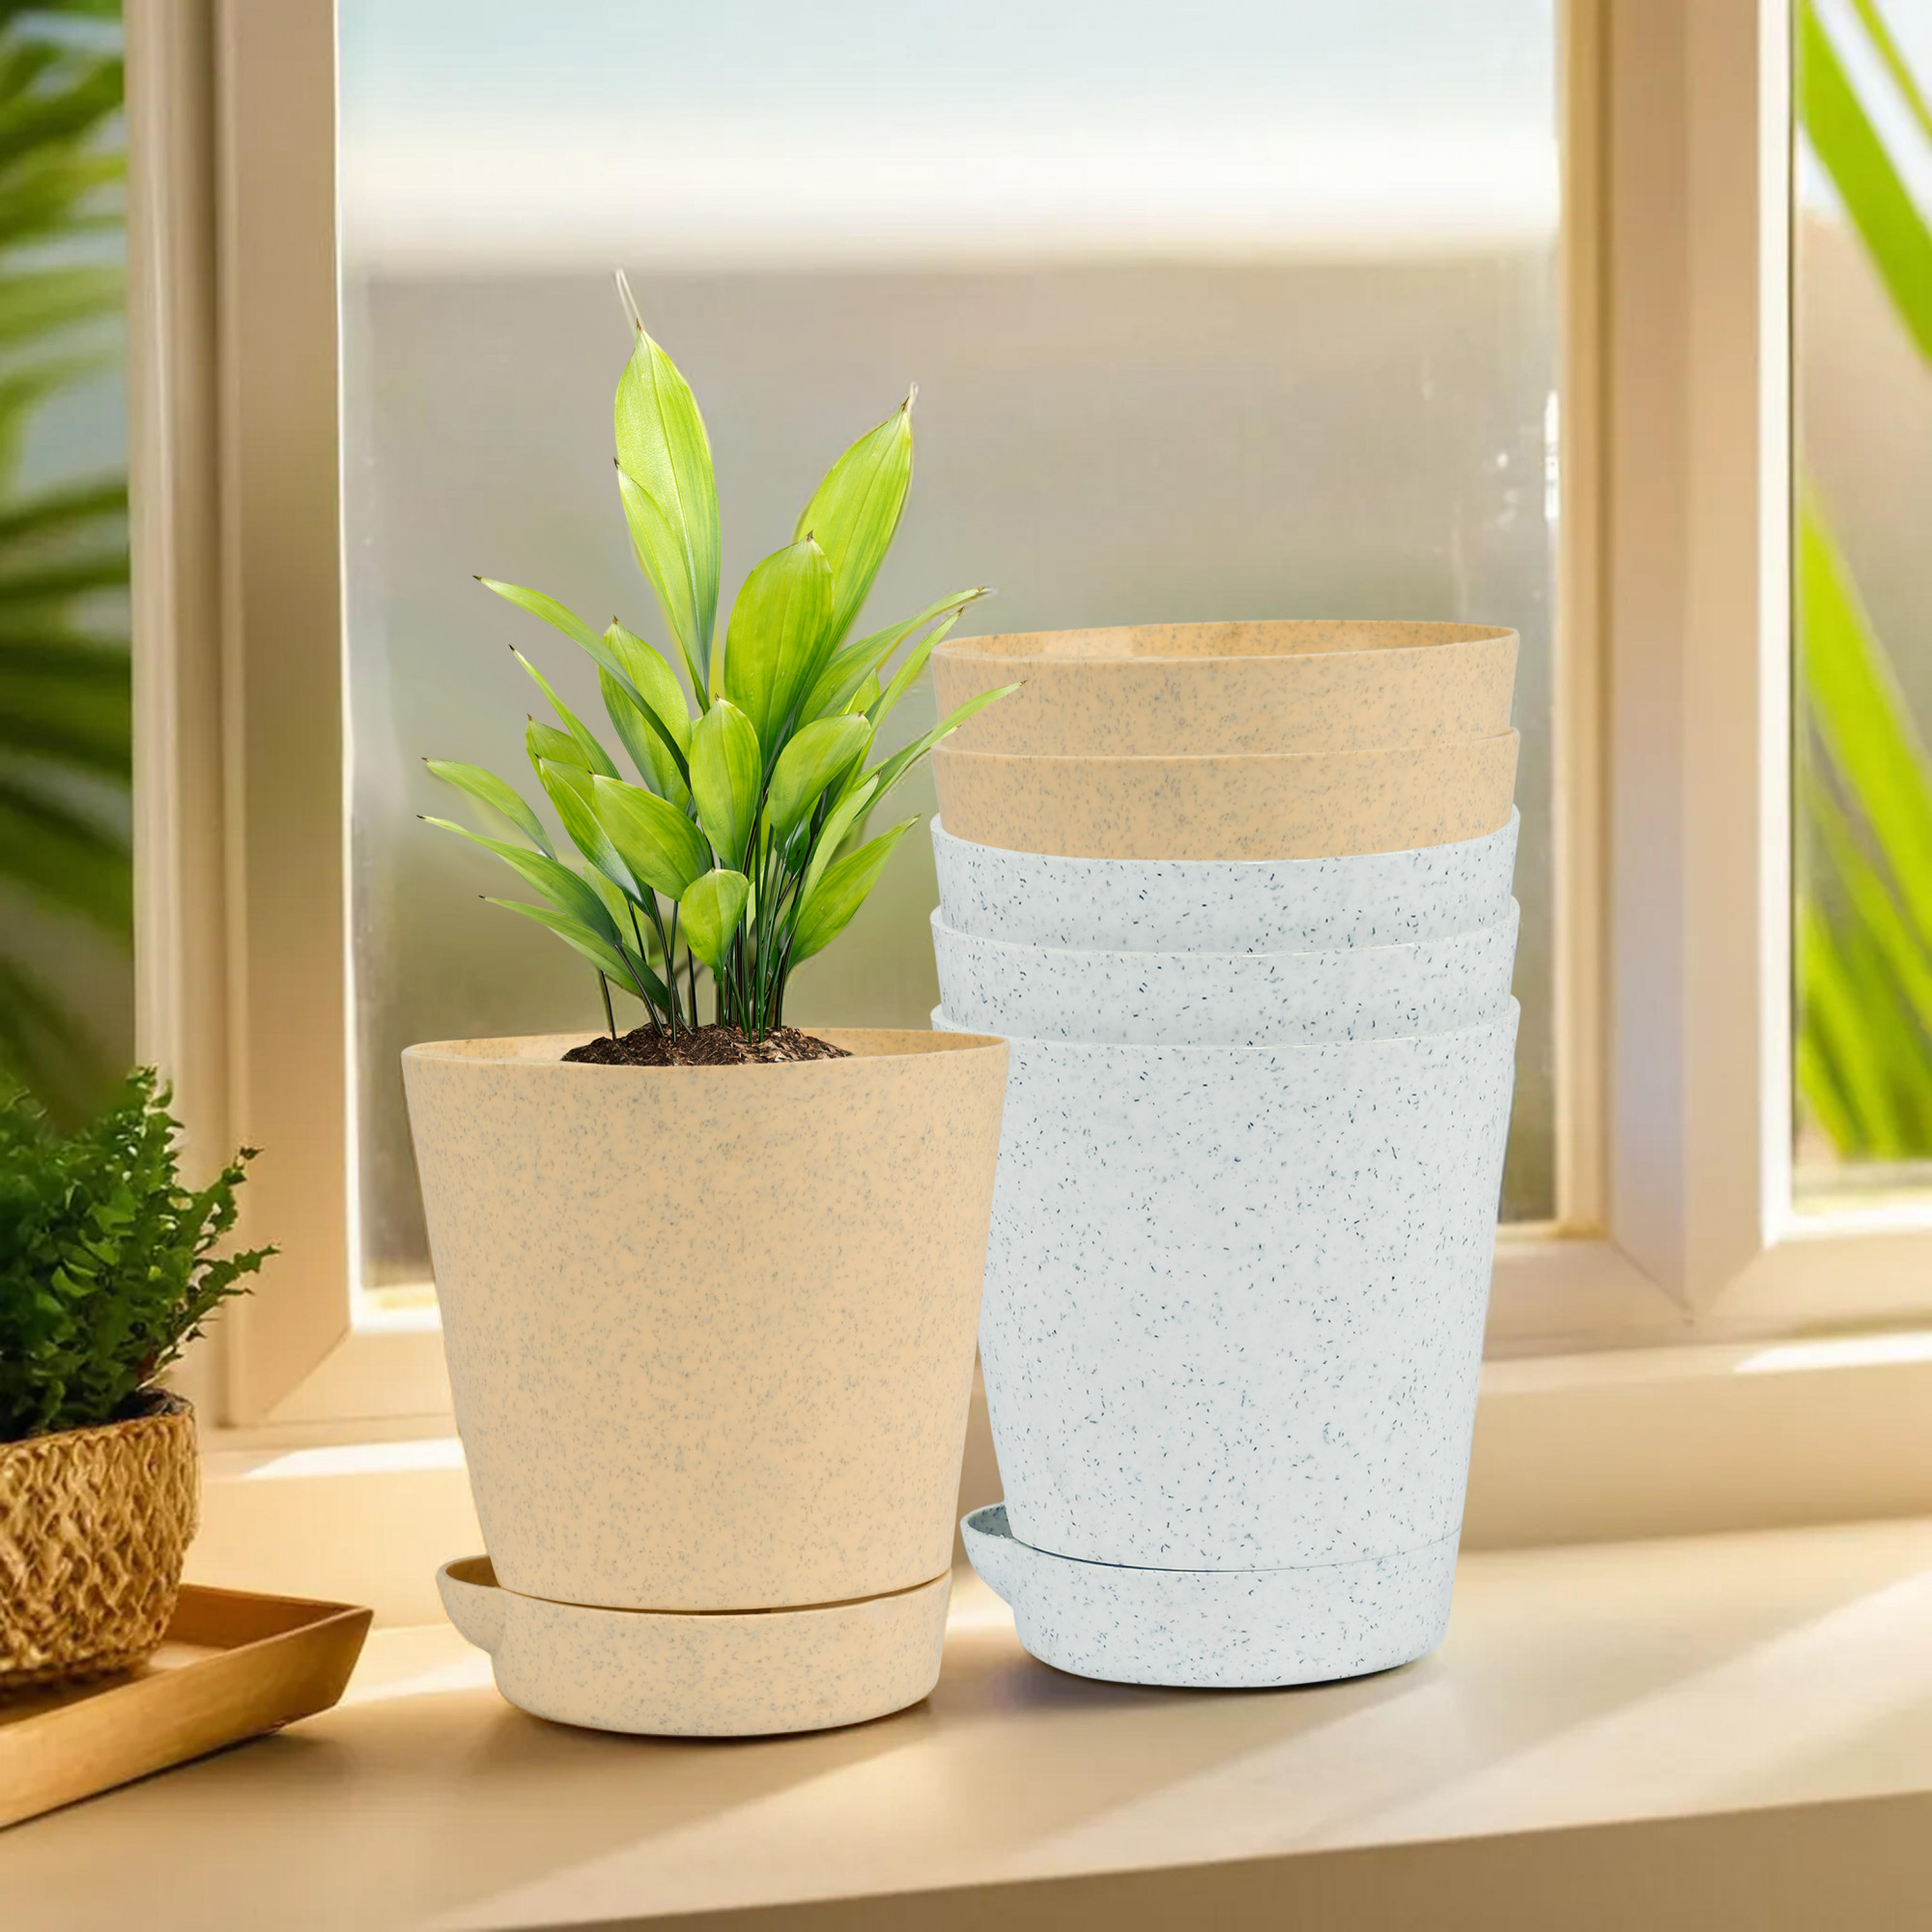 Kuber Industries Flower Pot | Flower Pot for Living Room-Office | Planters for Home-office-Lawns & Garden Décor | Self Watering Flower Planters Pots | Marble Titan | 4 Inch | White & Beige